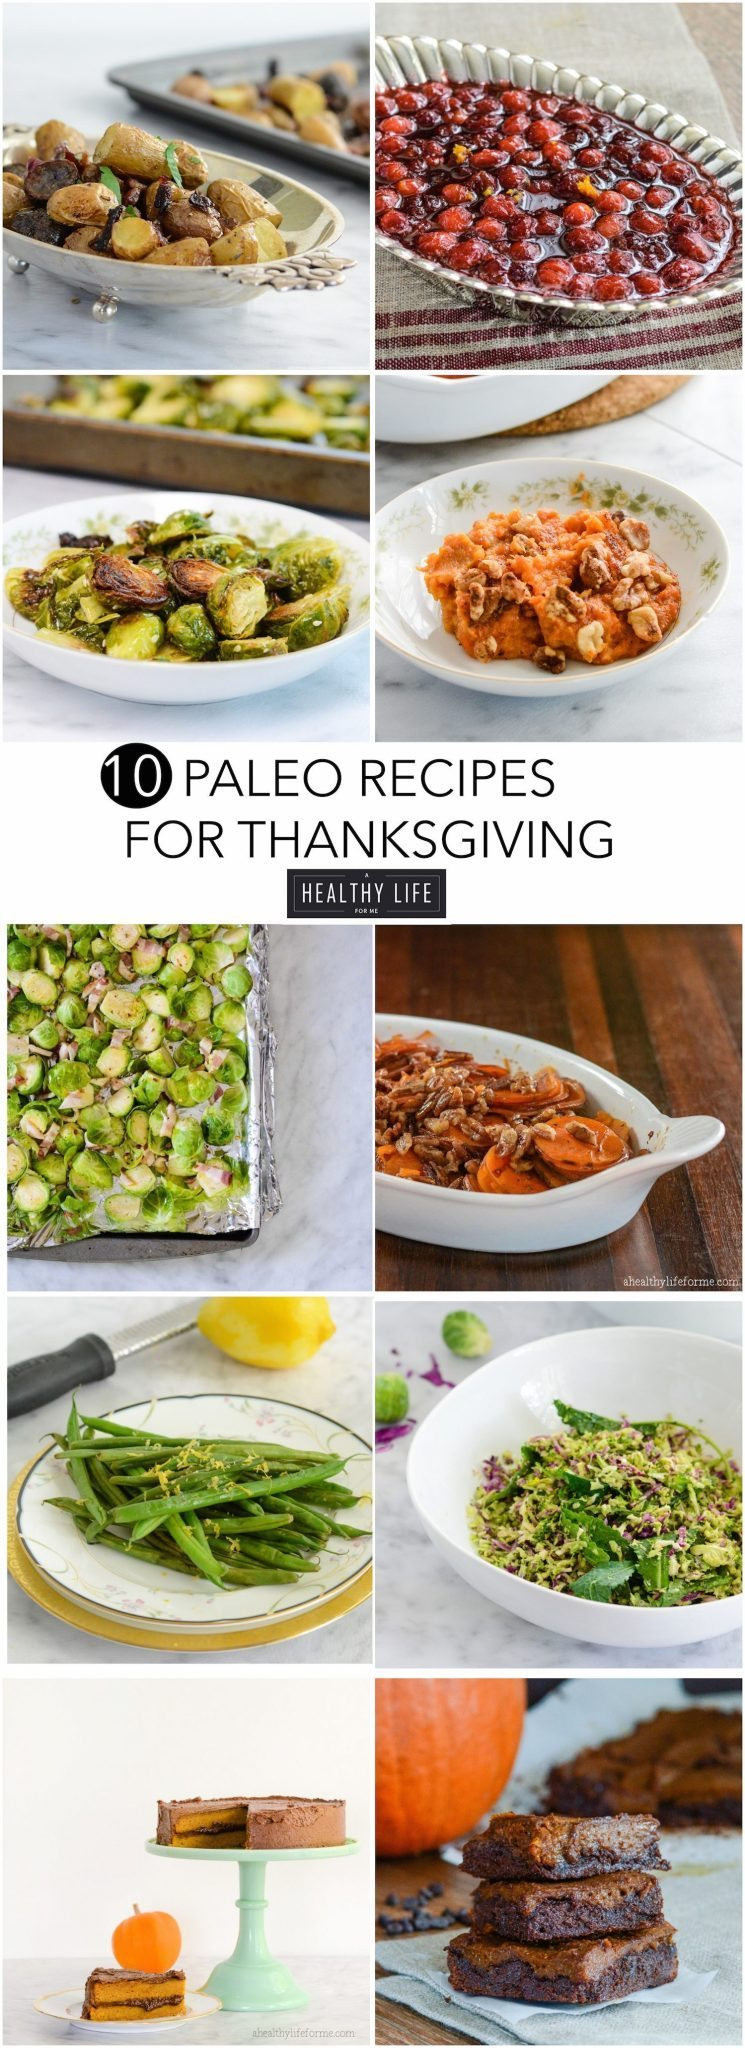 Paleo Thanksgiving Recipes
 Paleo Recipes for Thanksgiving A Healthy Life For Me